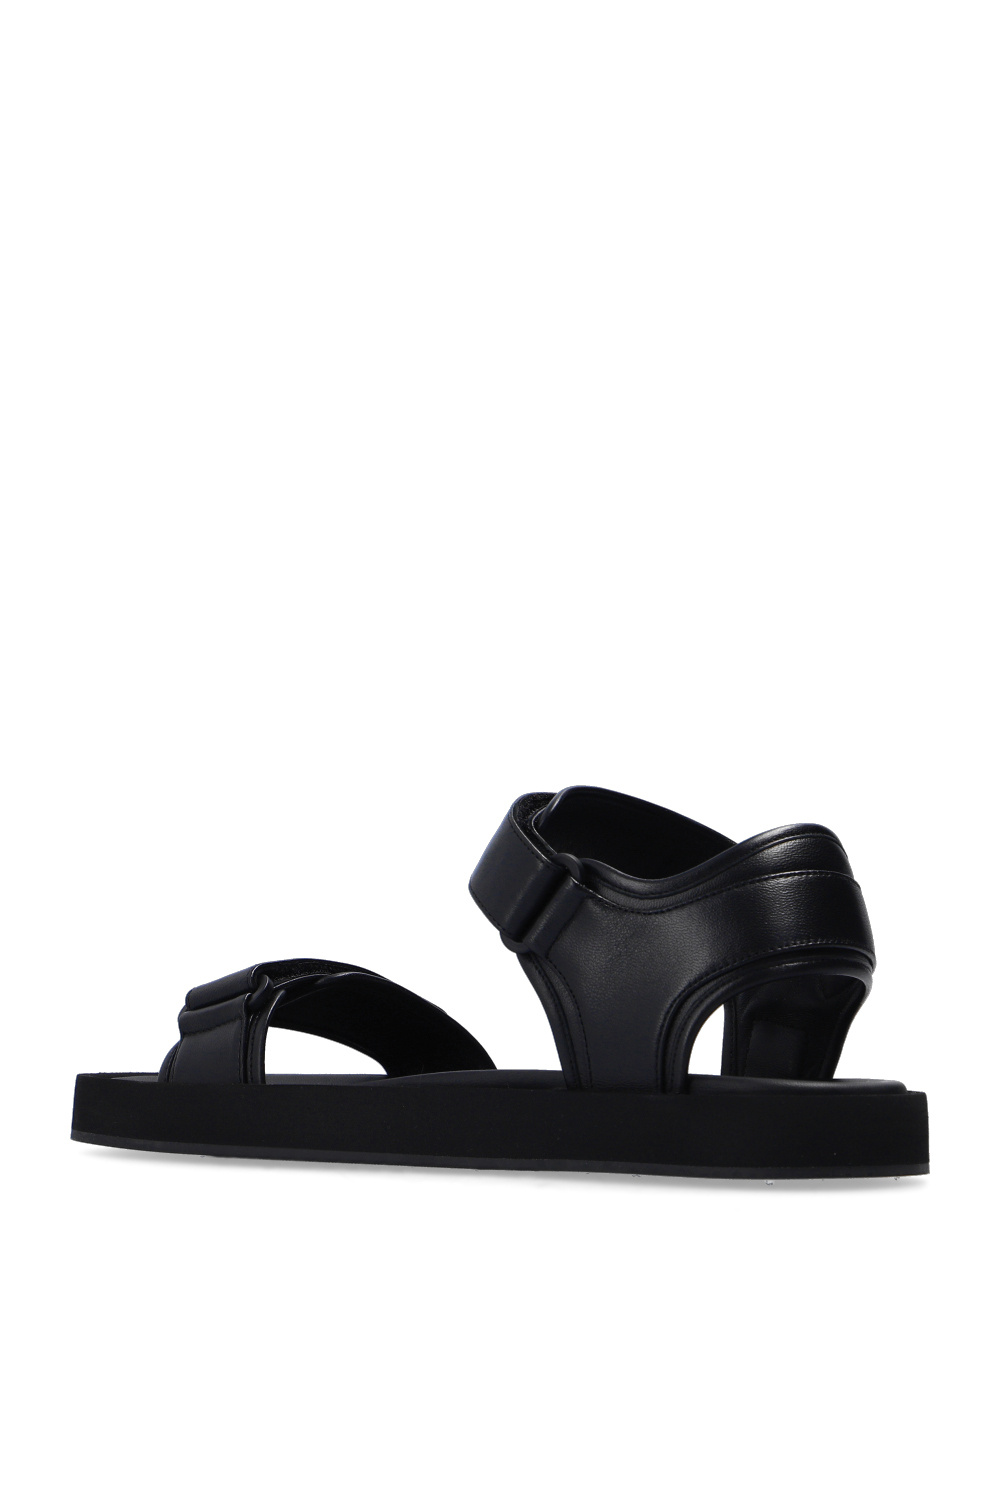 The Row ‘Hook-And-Loop II’ leather sandals